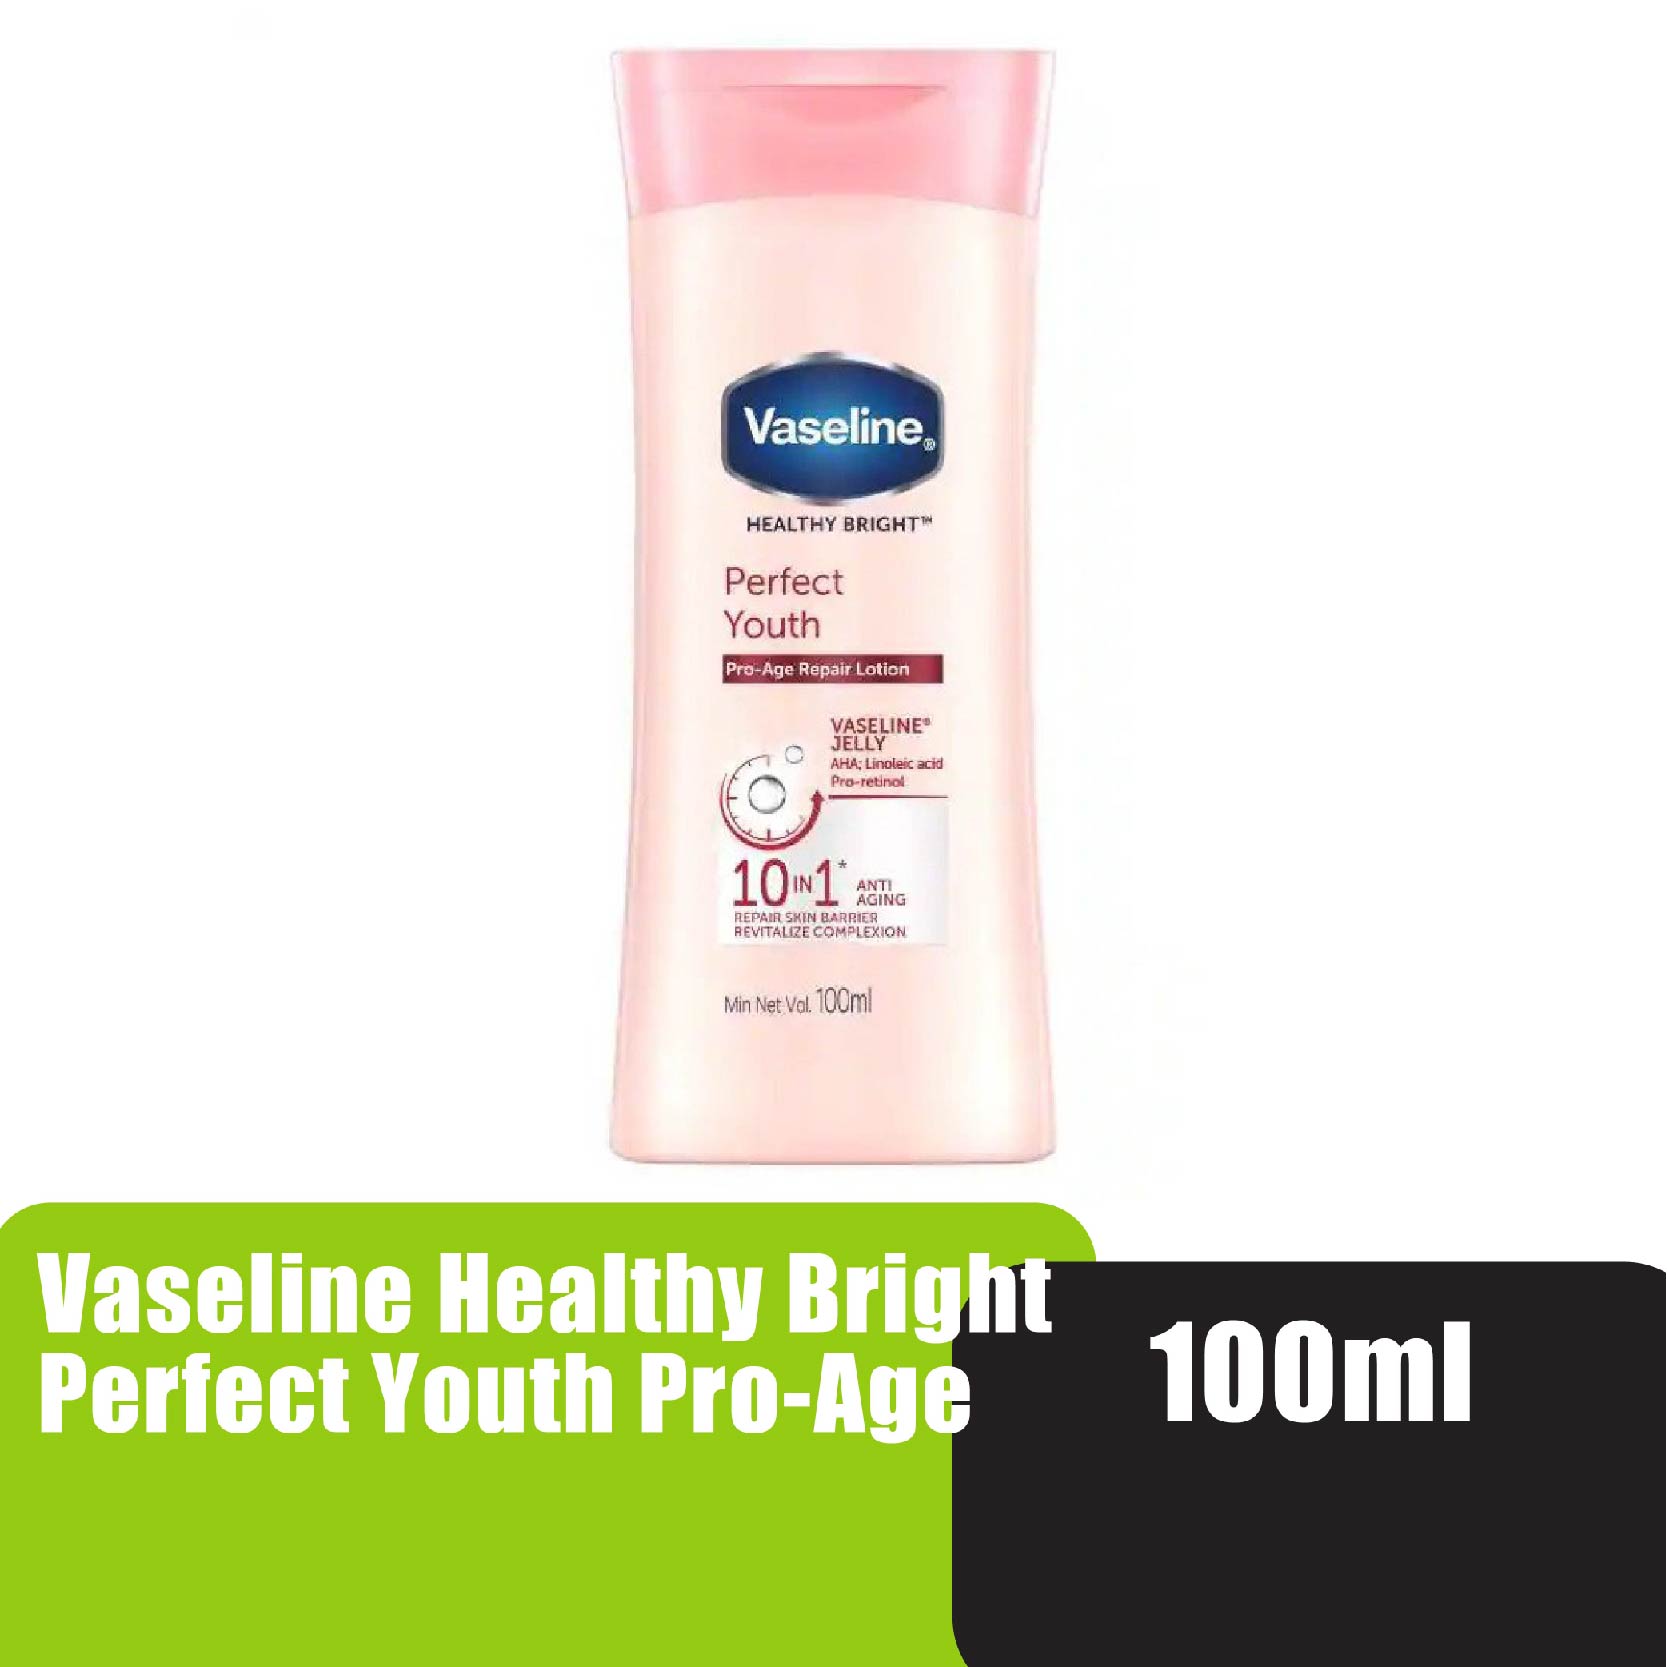 Vaseline Healthy Bright Perfect Youth Pro-Age Repair Lotion 100ml